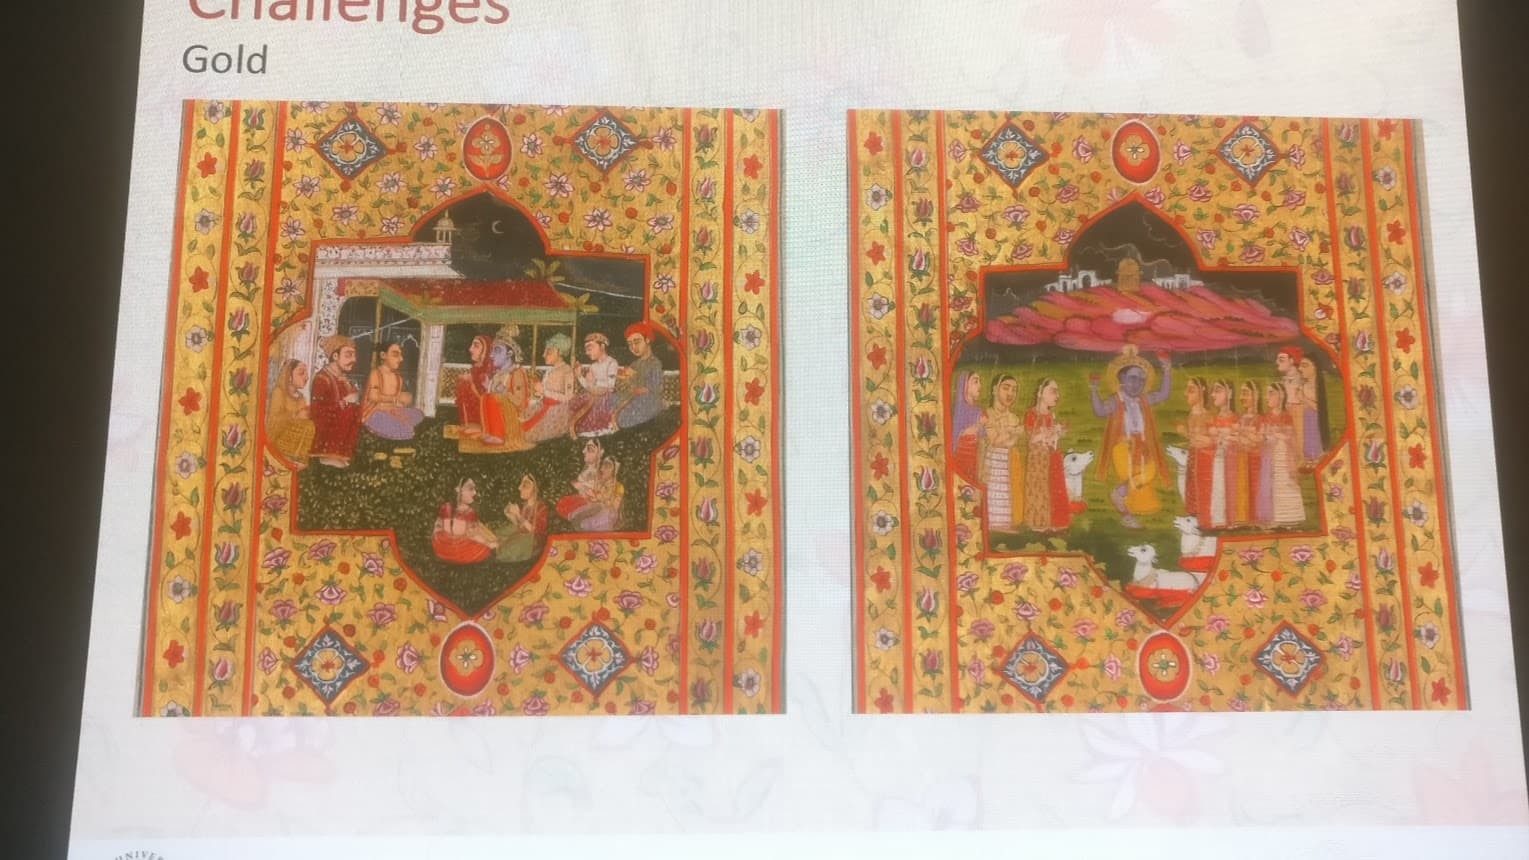 One of the challenge slides from imaging the scroll of Mahābhārata